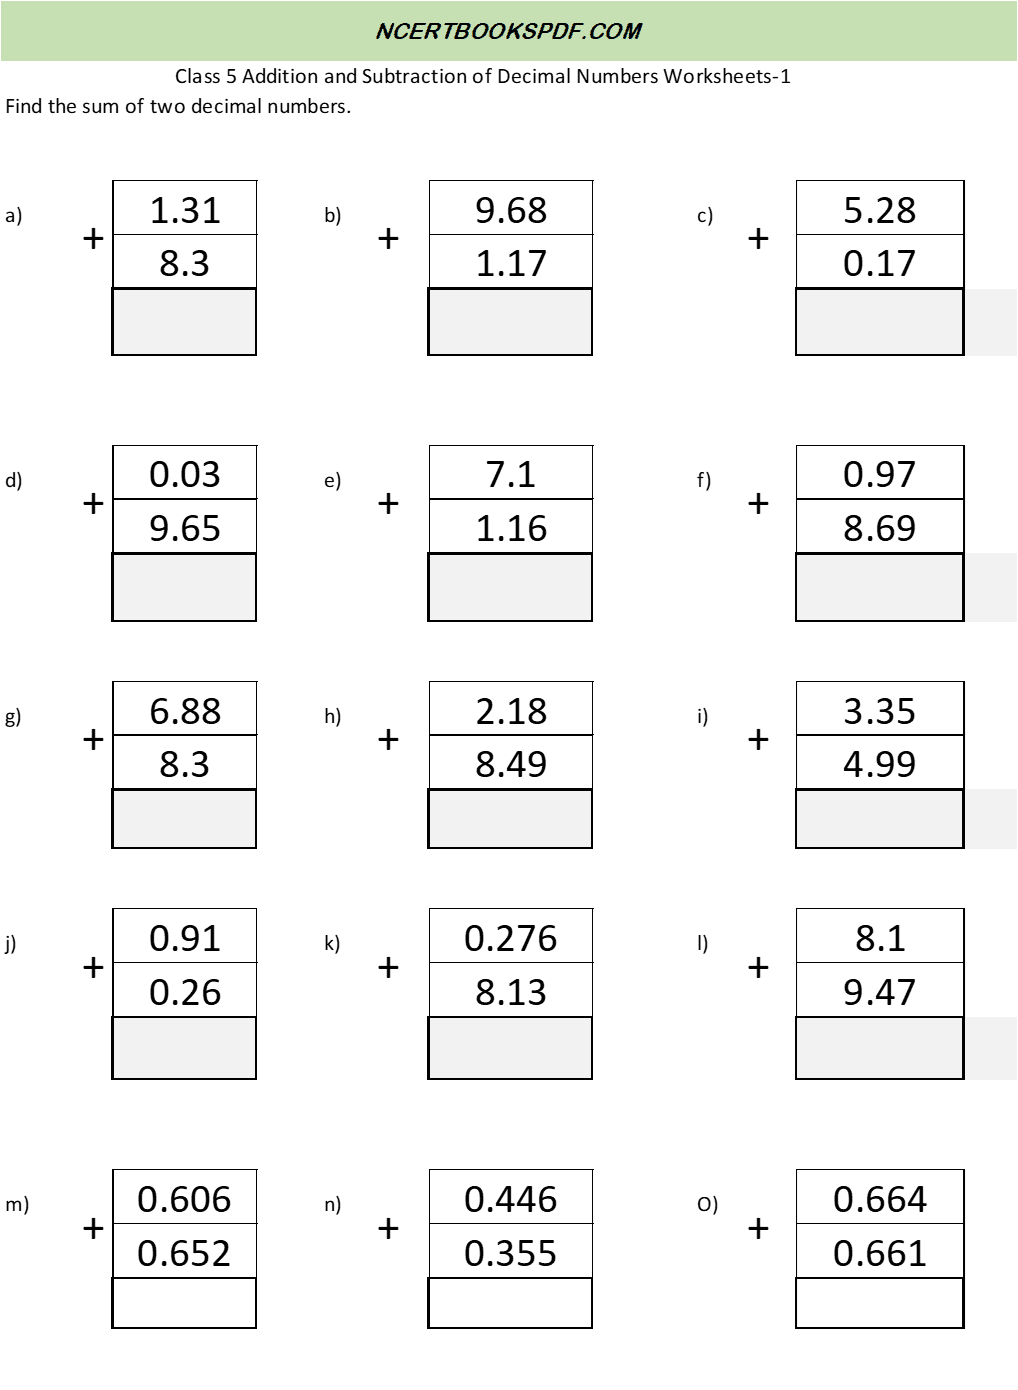 Class 5 Addition and Subtraction of Decimal Numbers Worksheets